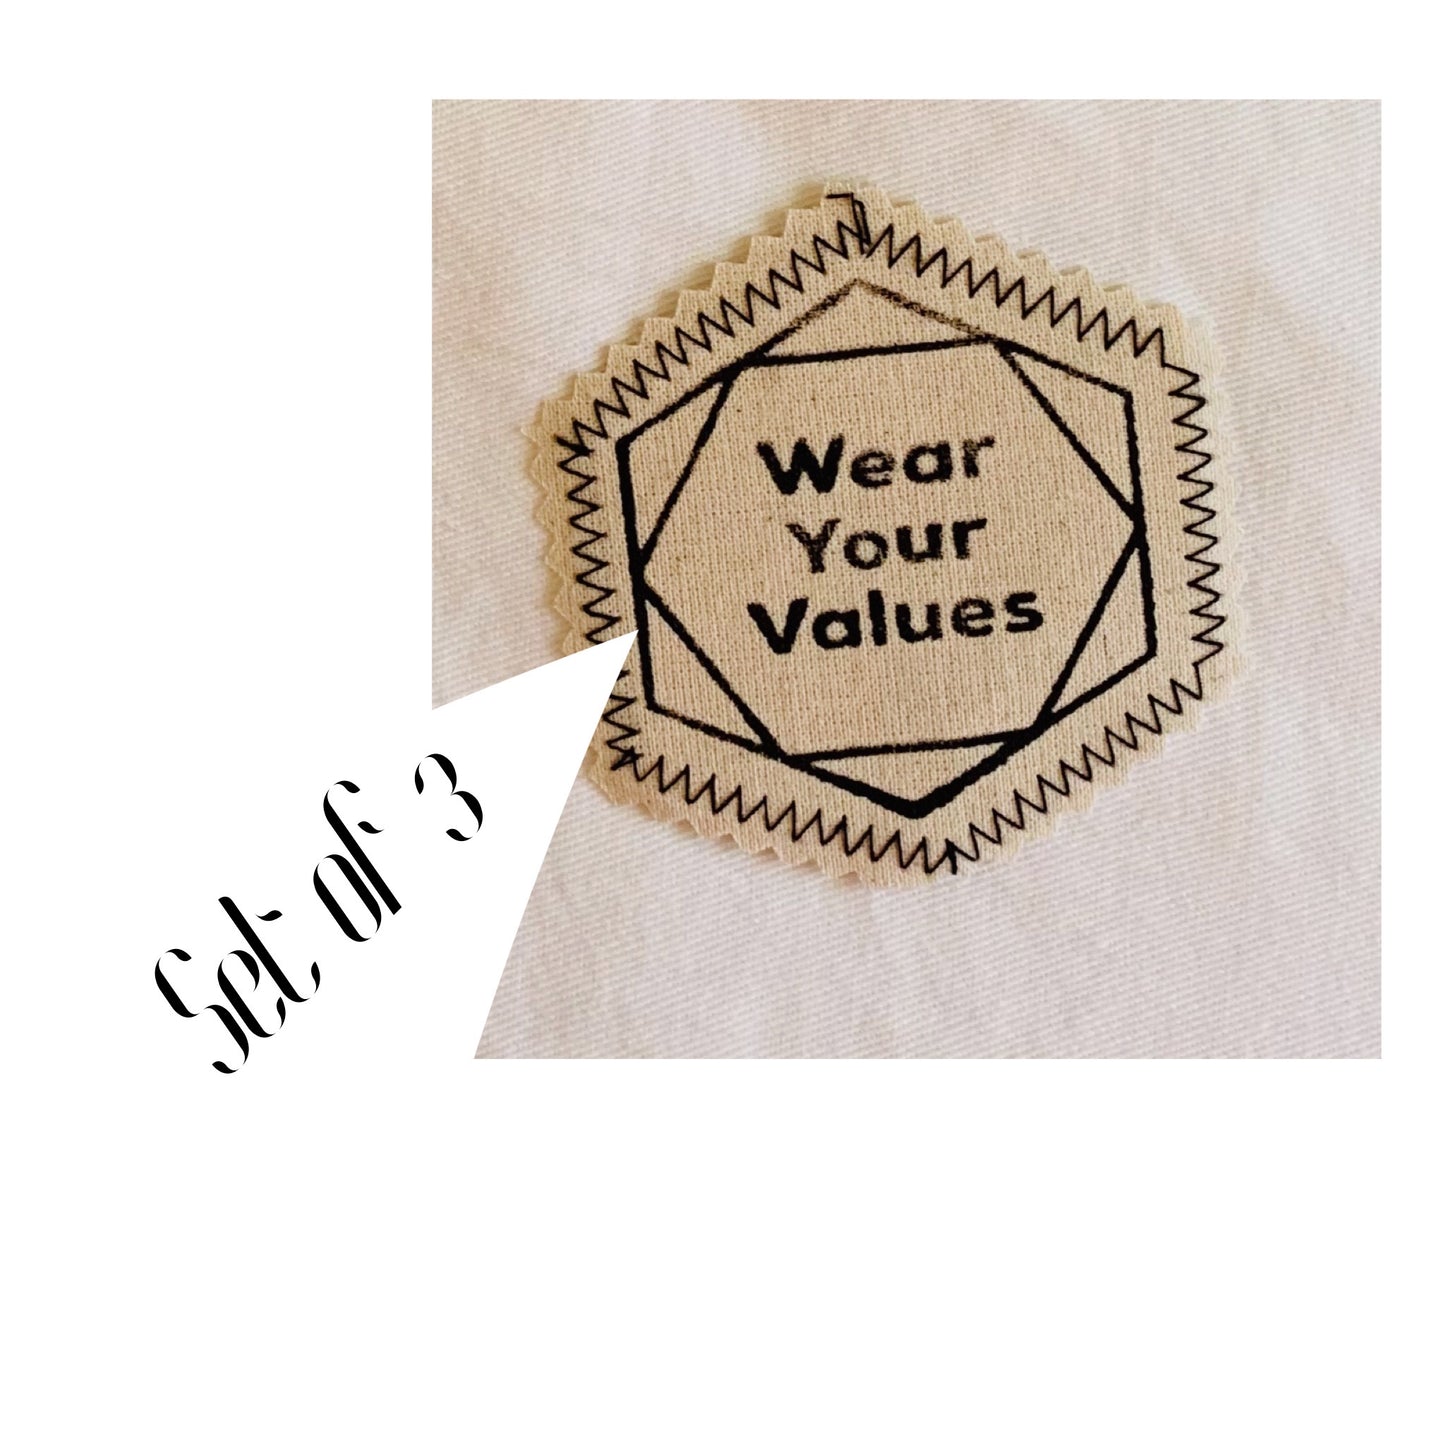 Wear your values sew on patches